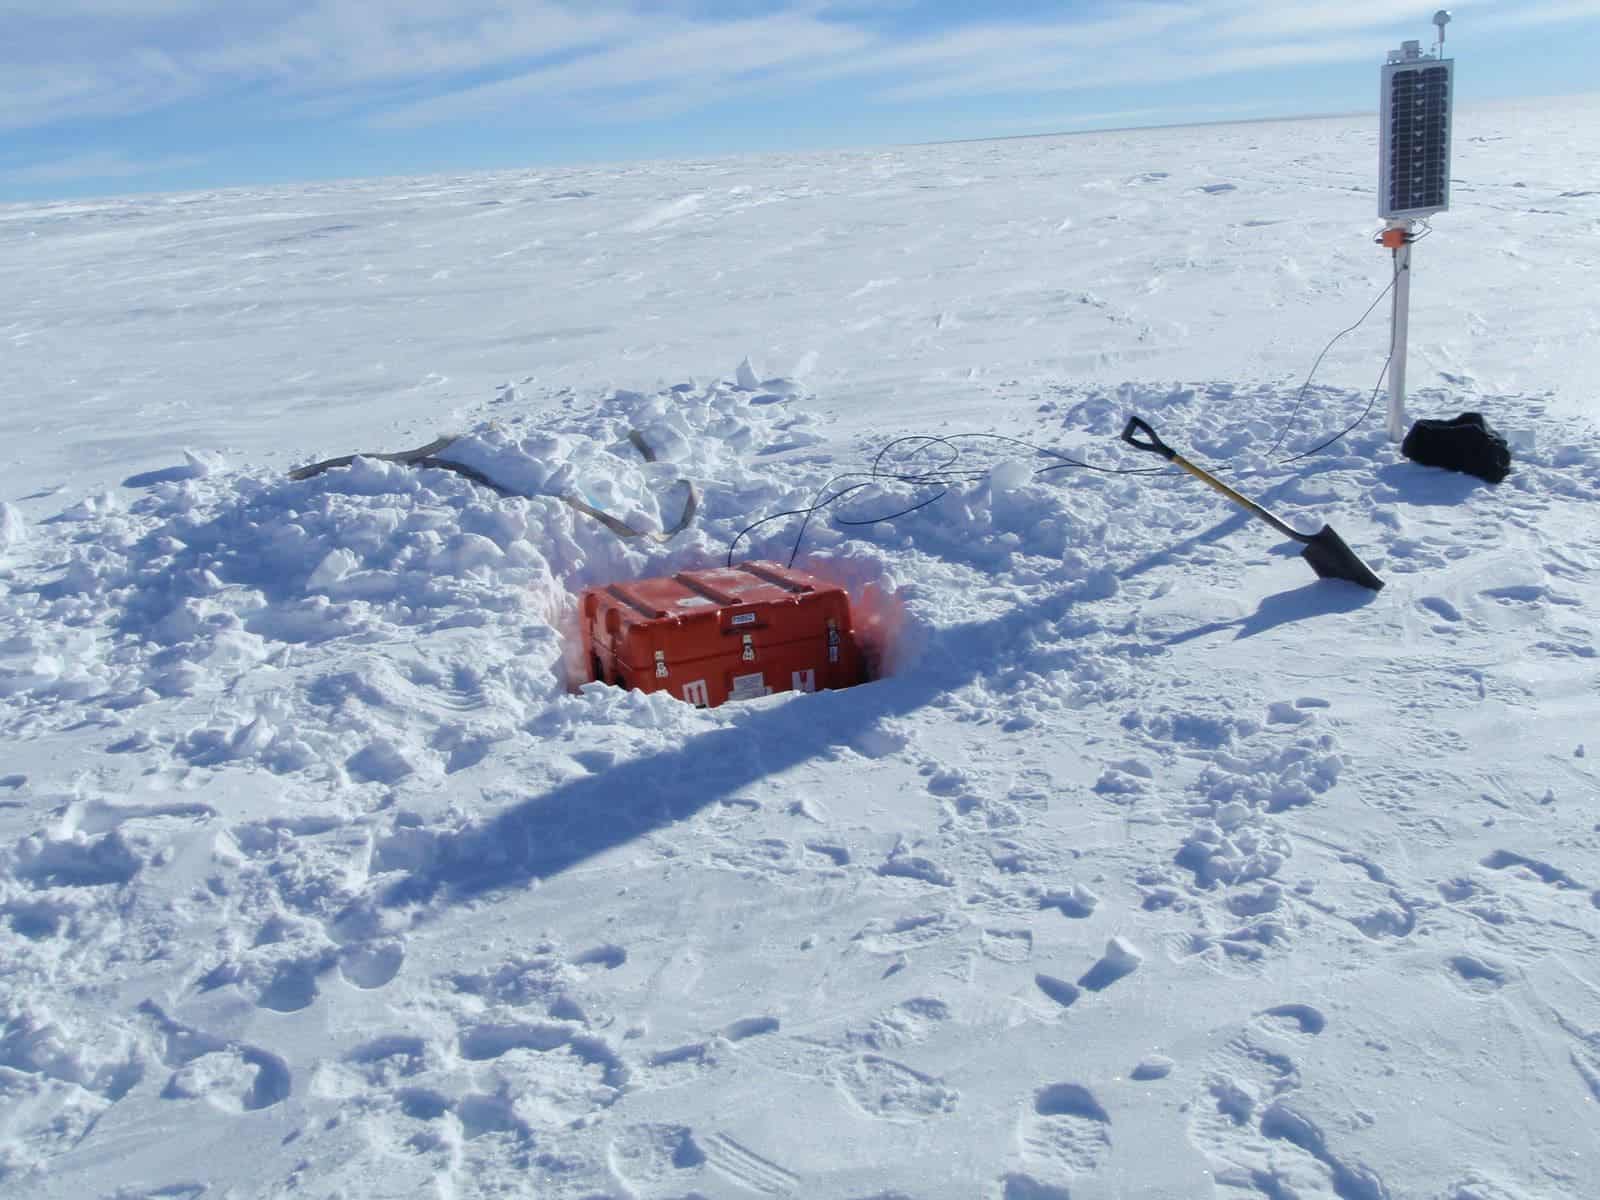 An installation of one of the monitors in the East Antarctica seismic array. Image credits: Amanda Lough.